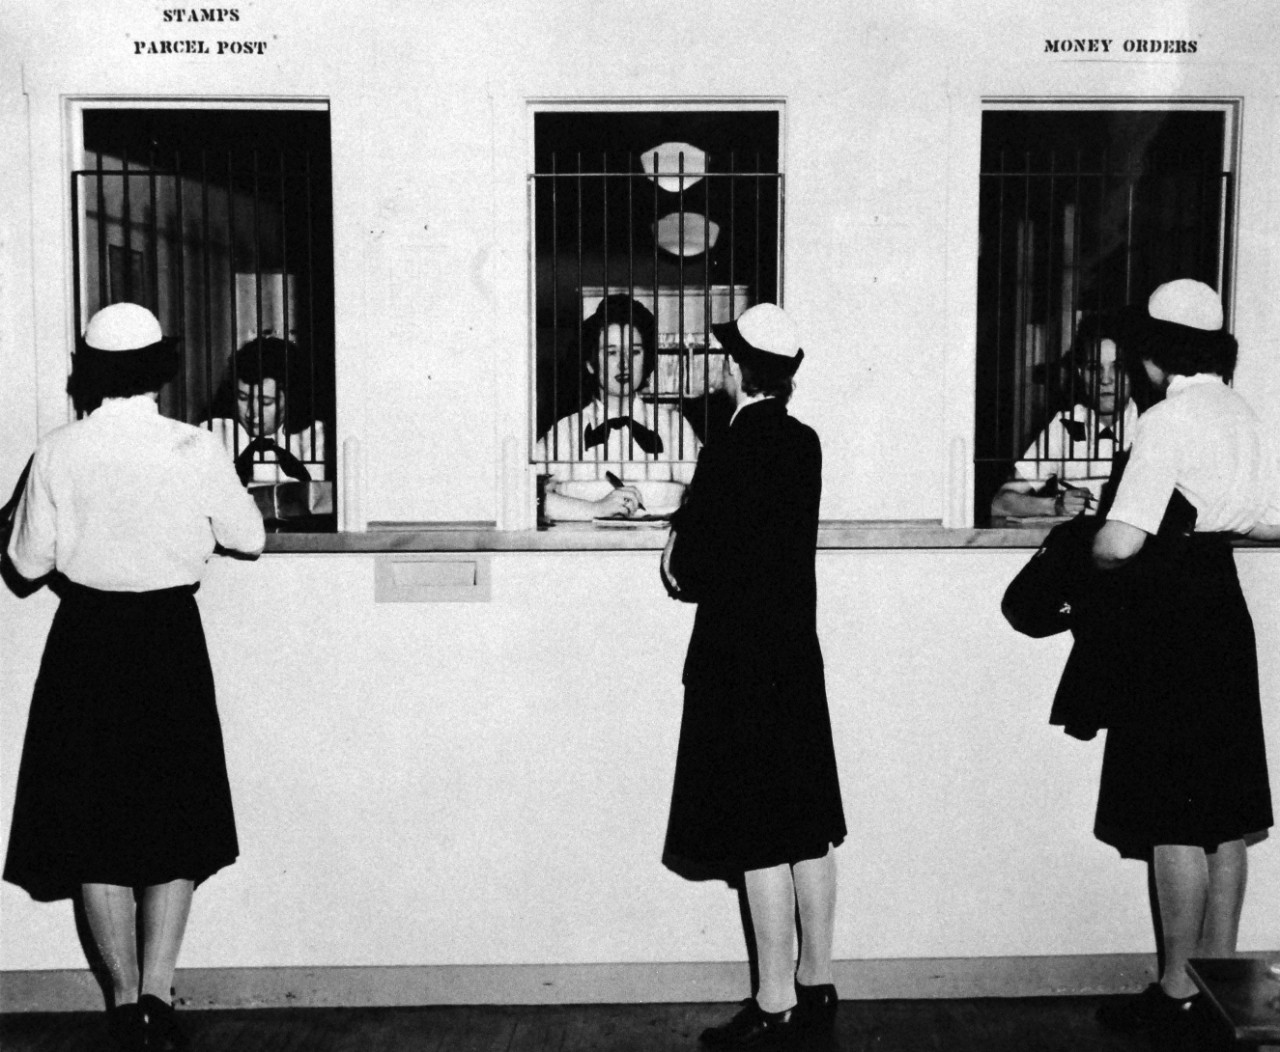 80-G-45722:   First Post Office of its size in U.S. History to be entirely staffed by women, June 1944.     Photographed at WAVES Quarters D, Washington, D.C.    Shown are three mail specialists on duty (left to right):   SP(N)3 Ruth Carter; SP(M)3 Patricia V. Campell, and SP(M)3 Marion C. Eastman, June 18, 1944.   Official U.S. Navy photograph, now in the collections of the National Archives. 